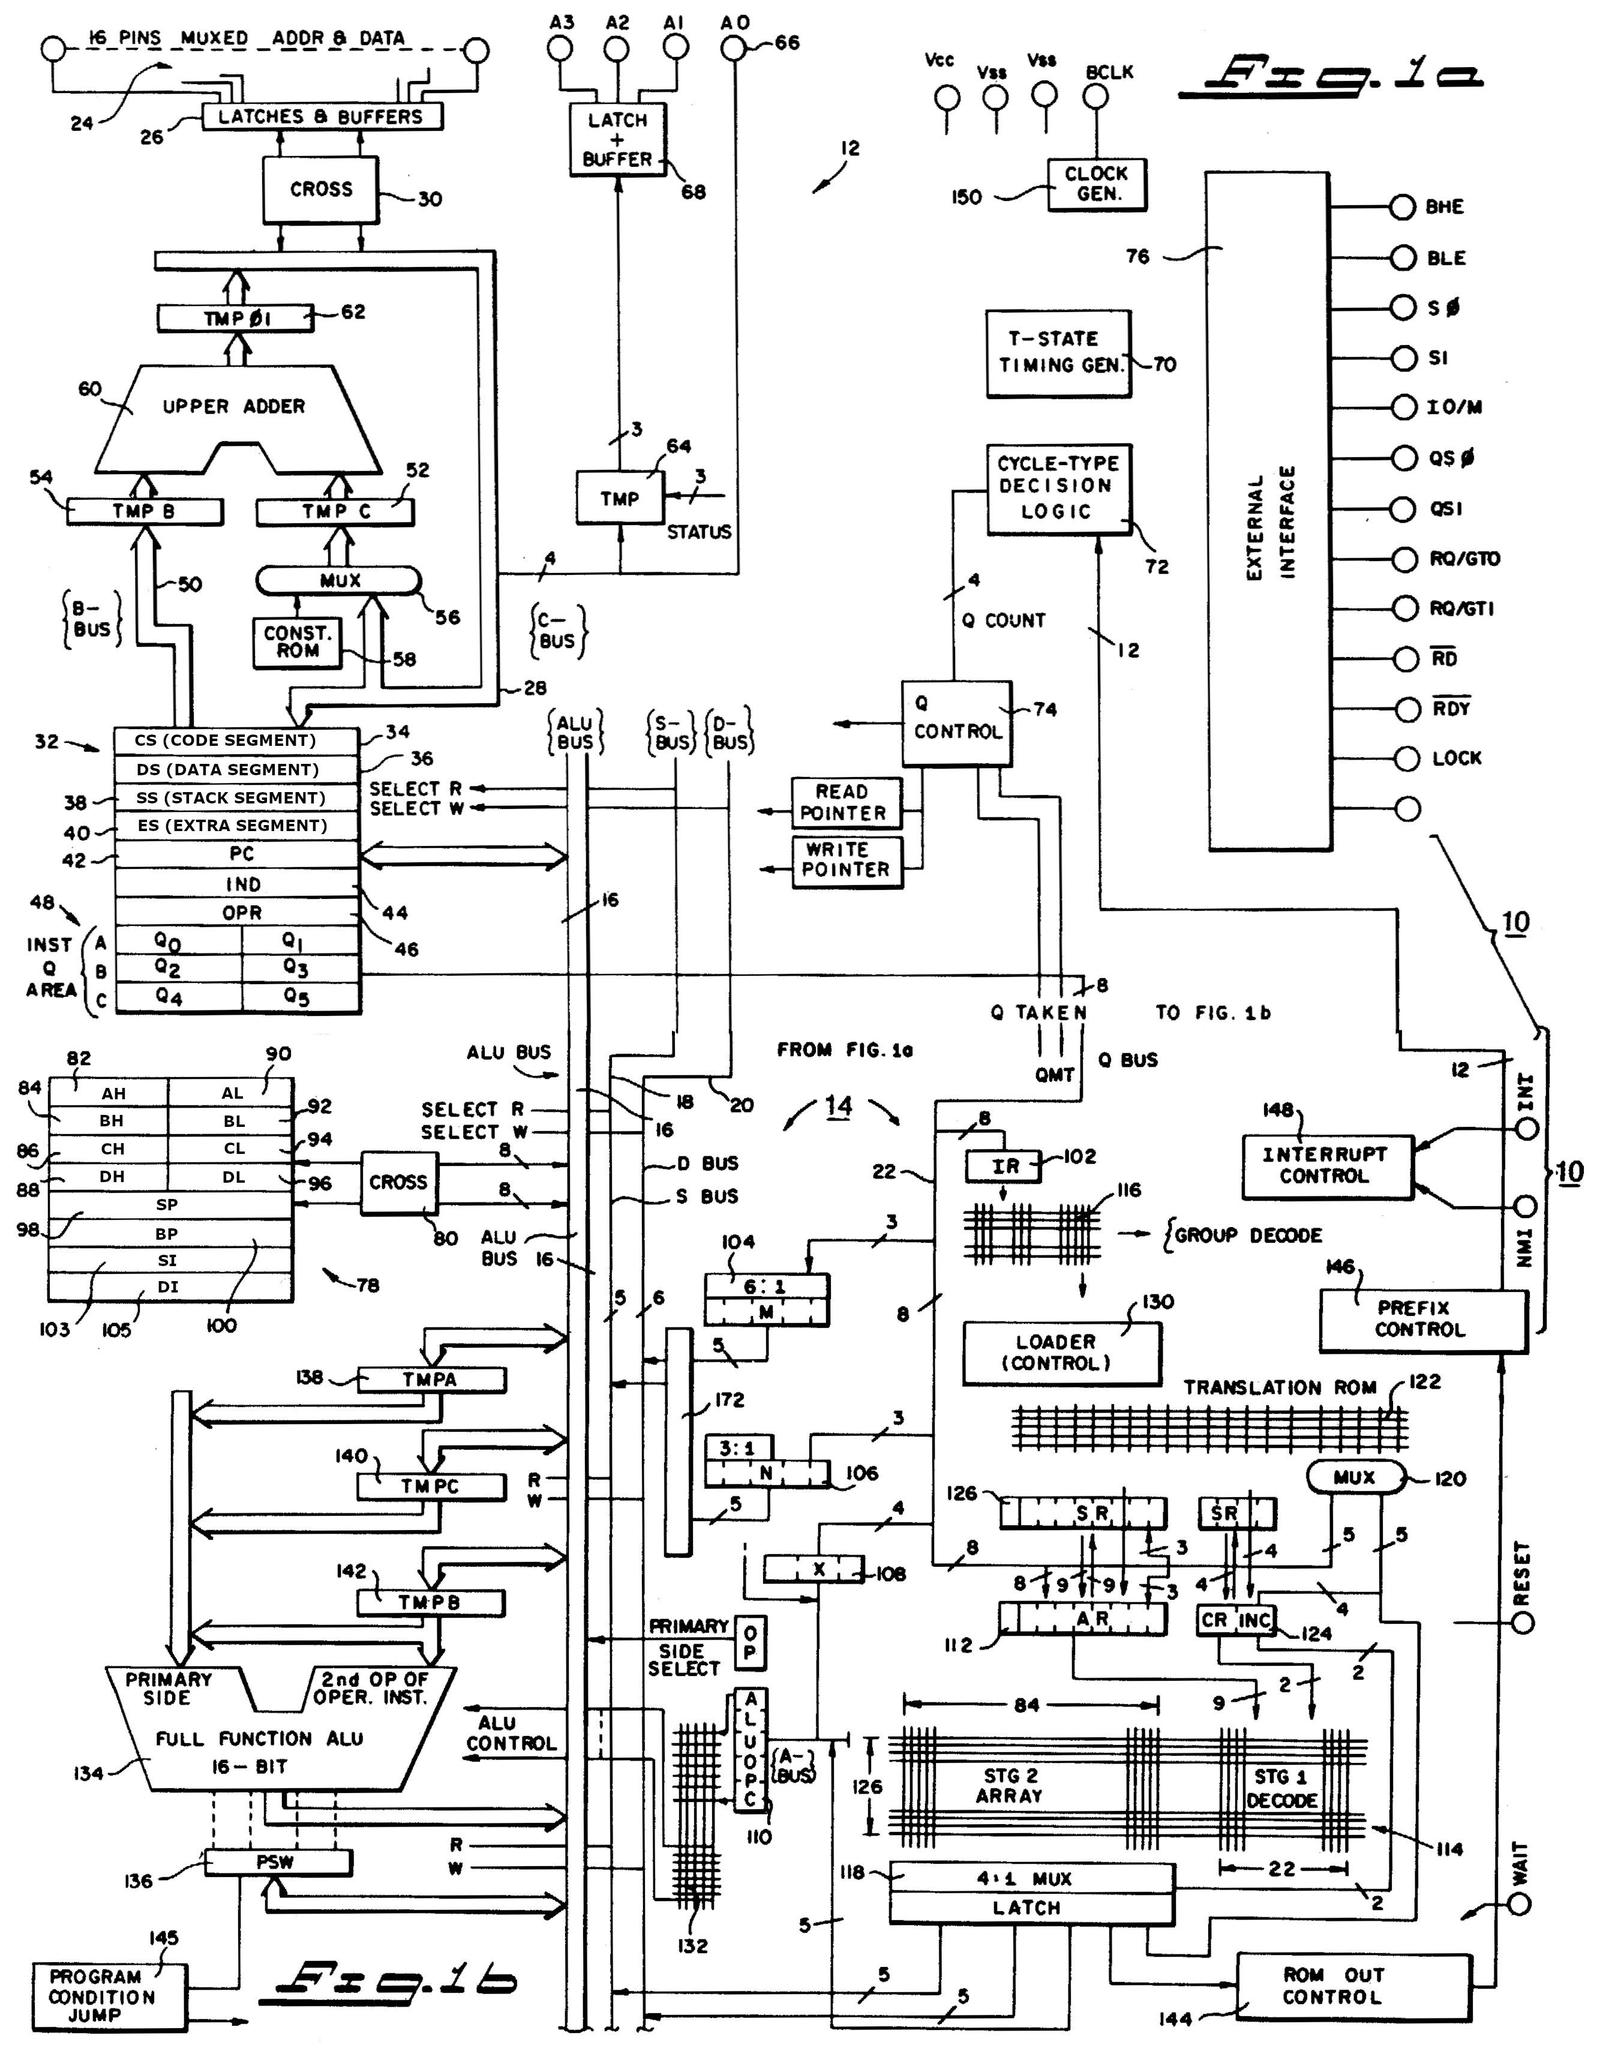 Detailed block diagram of the 8086, based on patent US4449184. I have modified the register names to match the common naming.